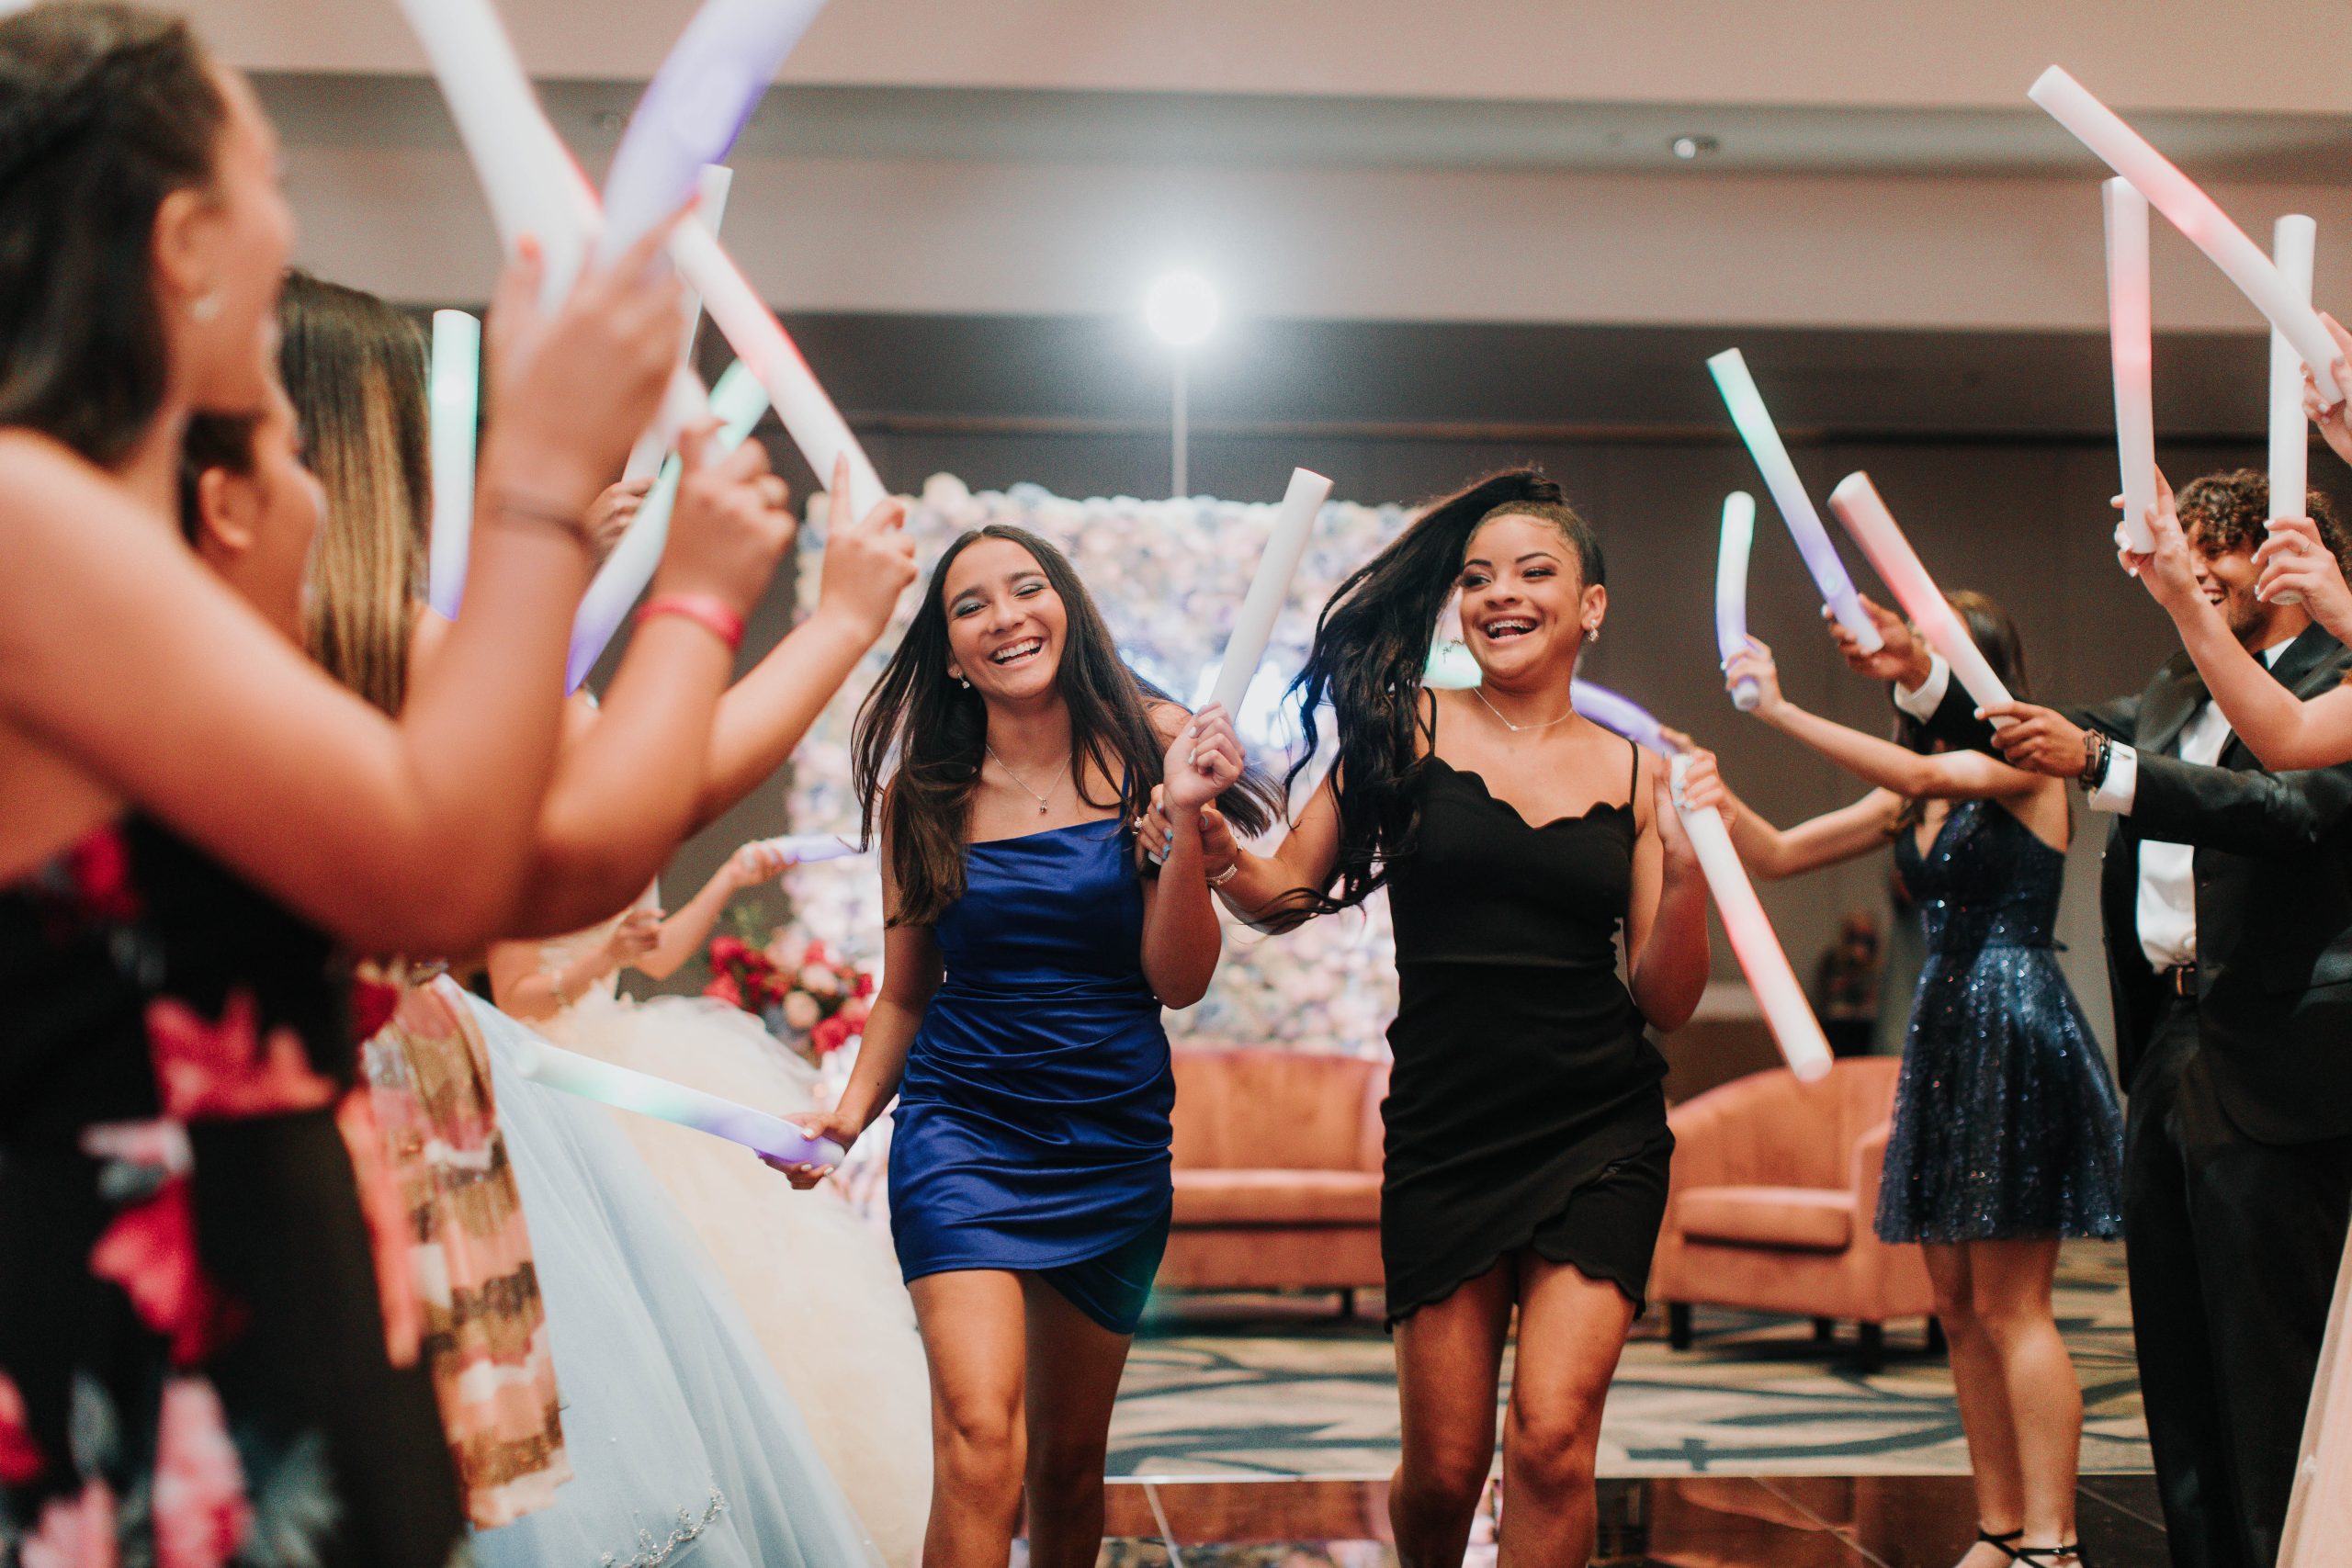 girls dancing for their friends at a sweet 16 party